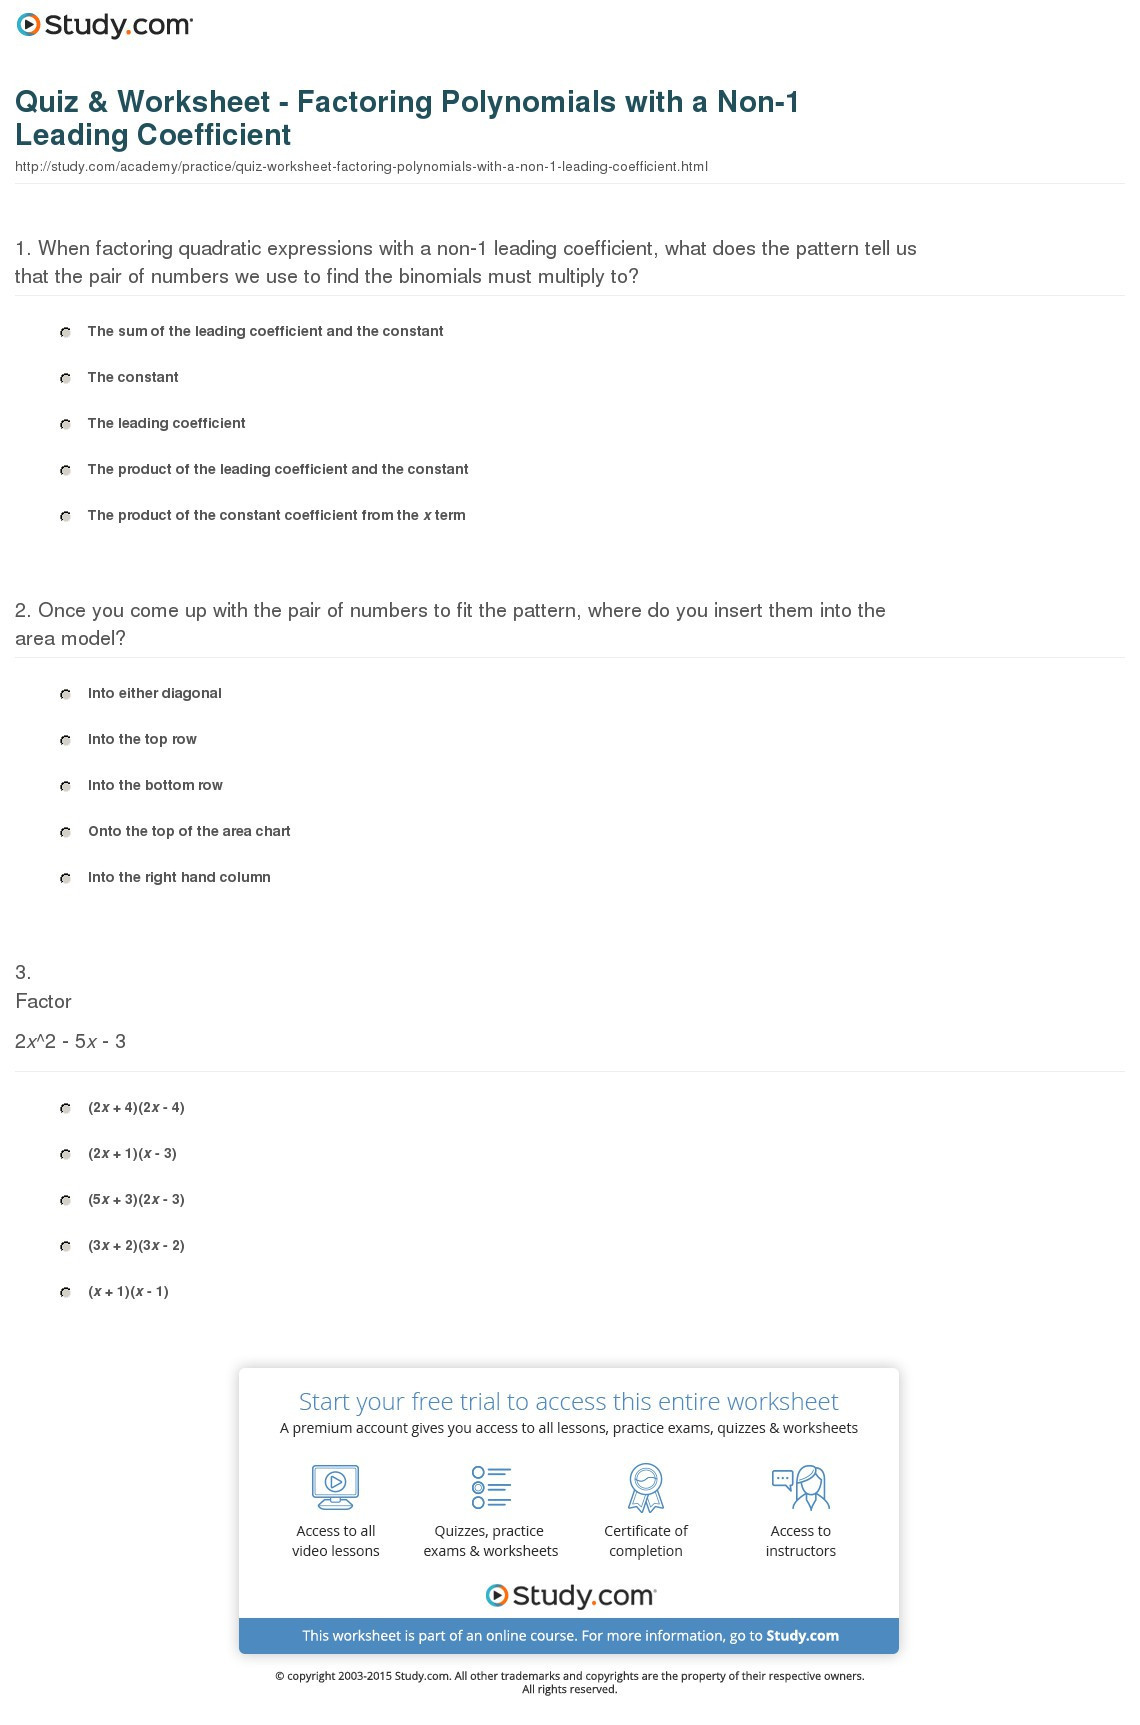 30 Factoring Quadratic Expressions Worksheet Answers Education Template